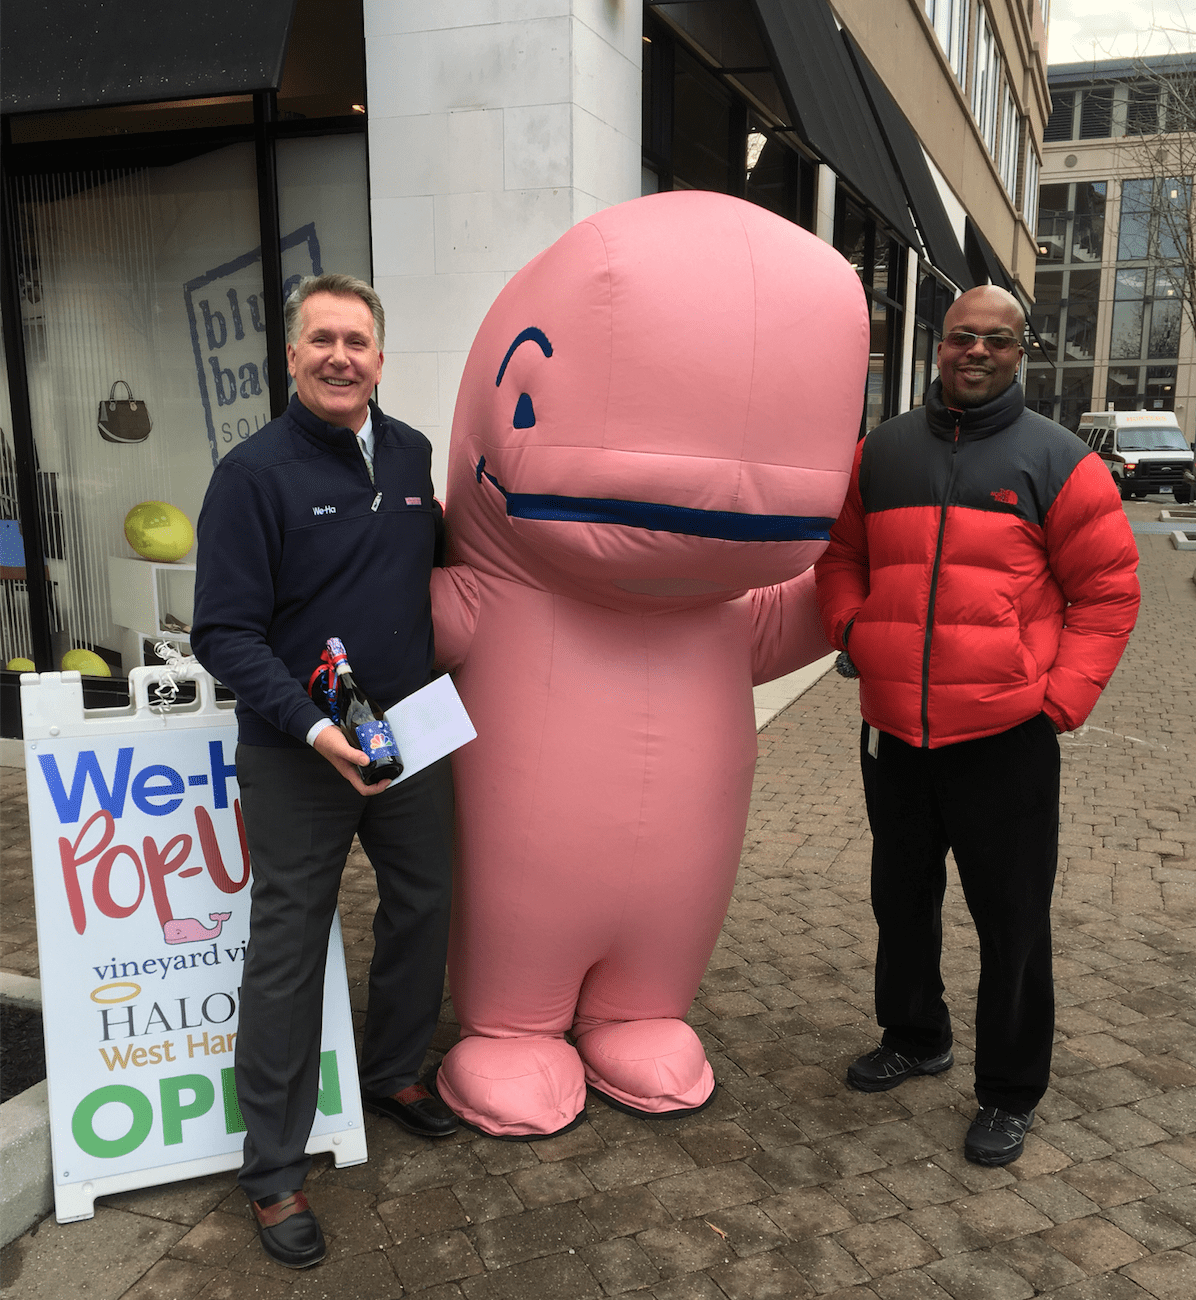 West Hartford Magazine Publisher Tom Hickey and NBC Connecticut Account Manager Anthony J. Wiggins with the Vineyard Vines Whale Mascot at the We-Ha Pop-Up Store in Blue Back Square. Tom is holding a champagne gift from NBC. Photo credit: Joy Taylor